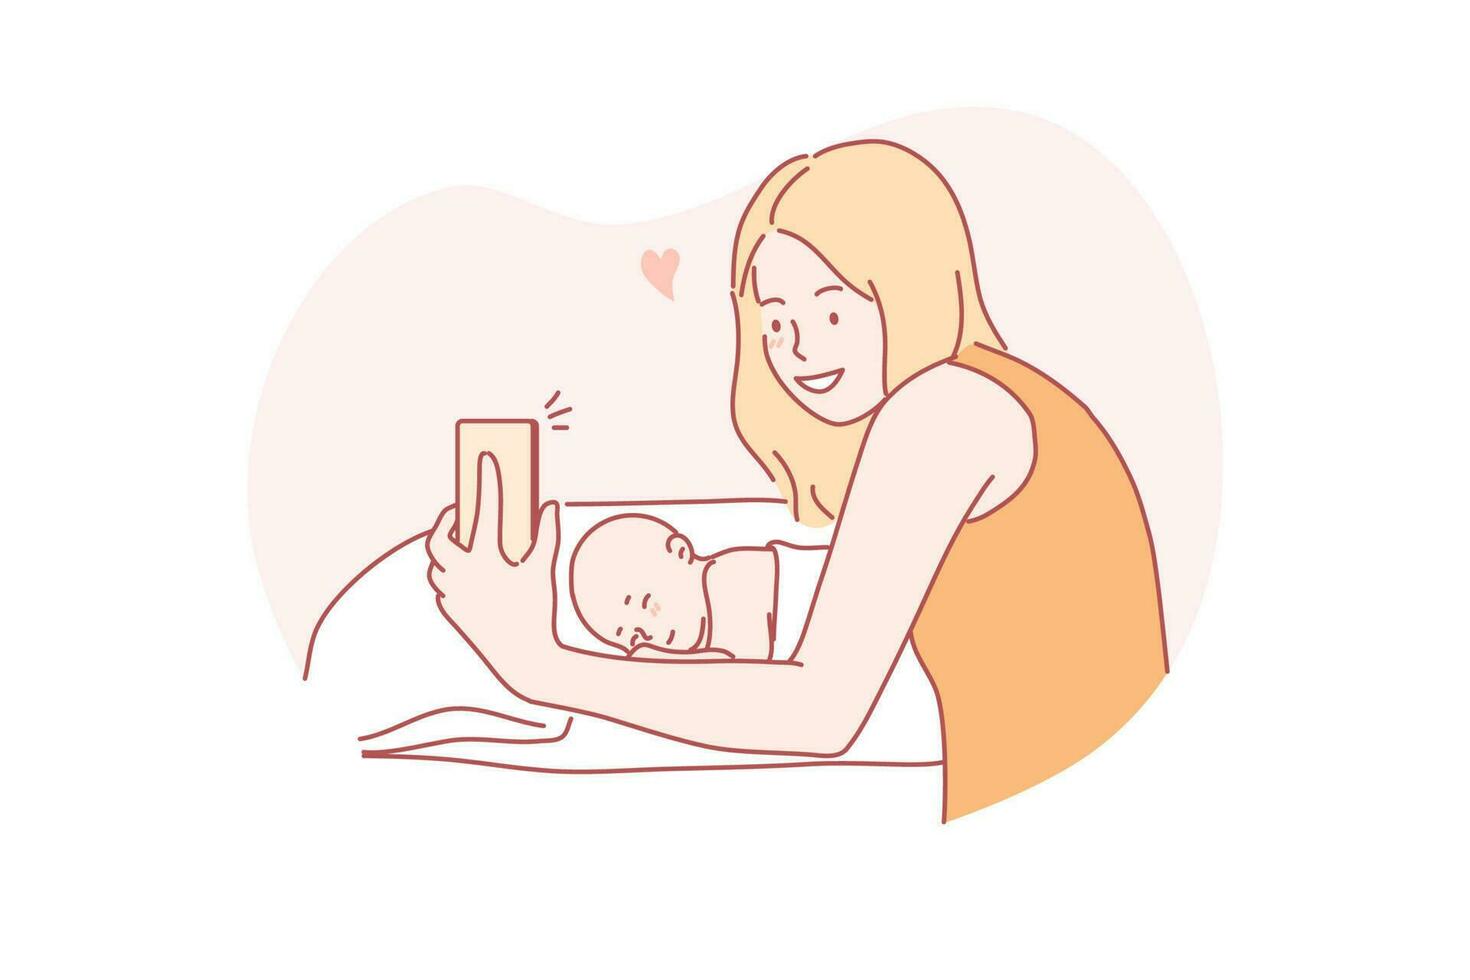 Selfie, motherhood, childhood, family concept. Young woman mother taking selfie with newborn baby sleeping in bed or video calling to father or relatives. New generation parenthood and mothers day. vector